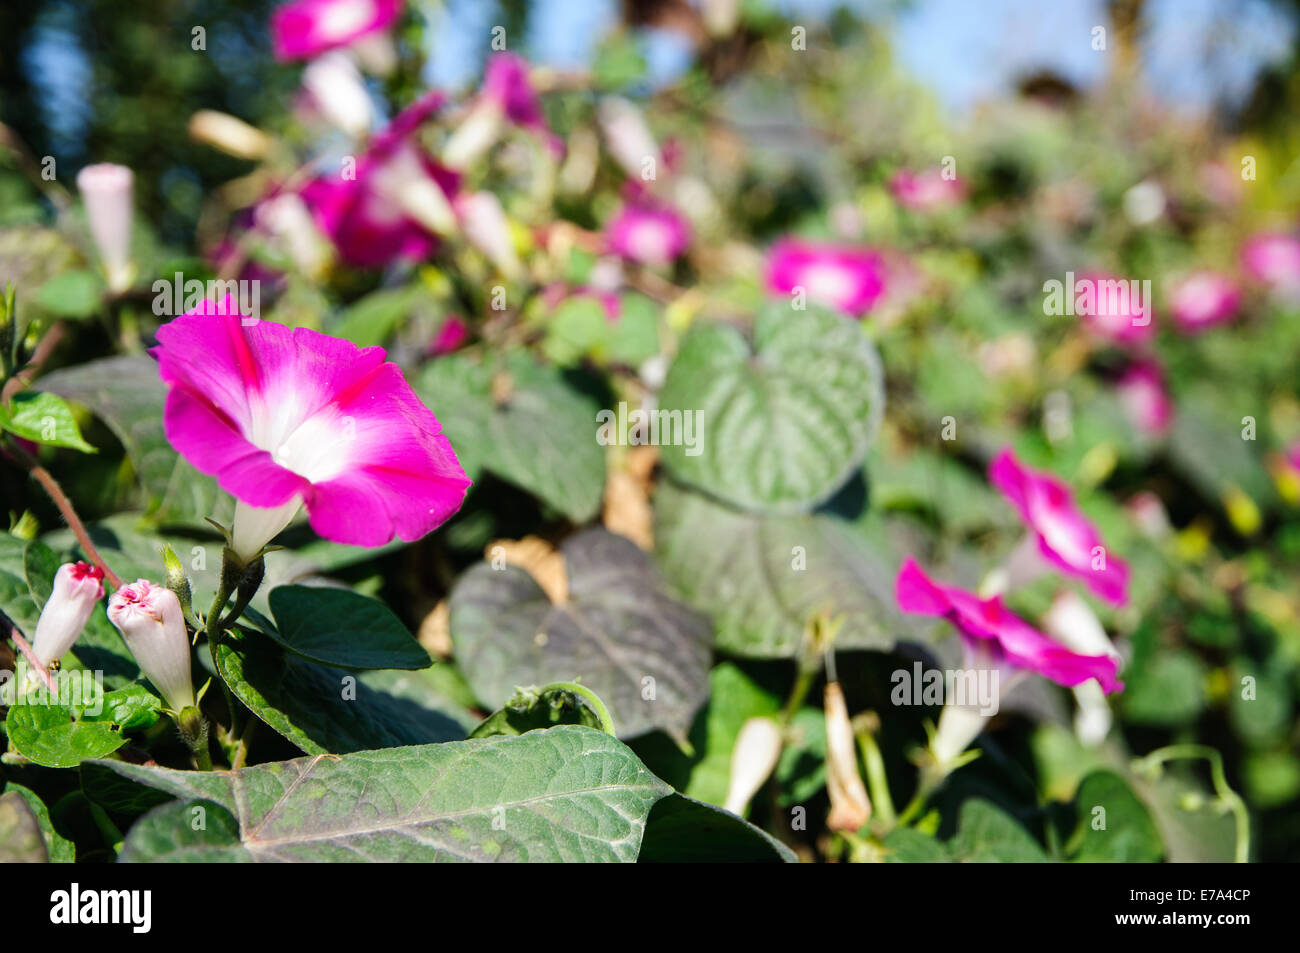 Purple flower and green vines Stock Photo by ©realrocking 2947079